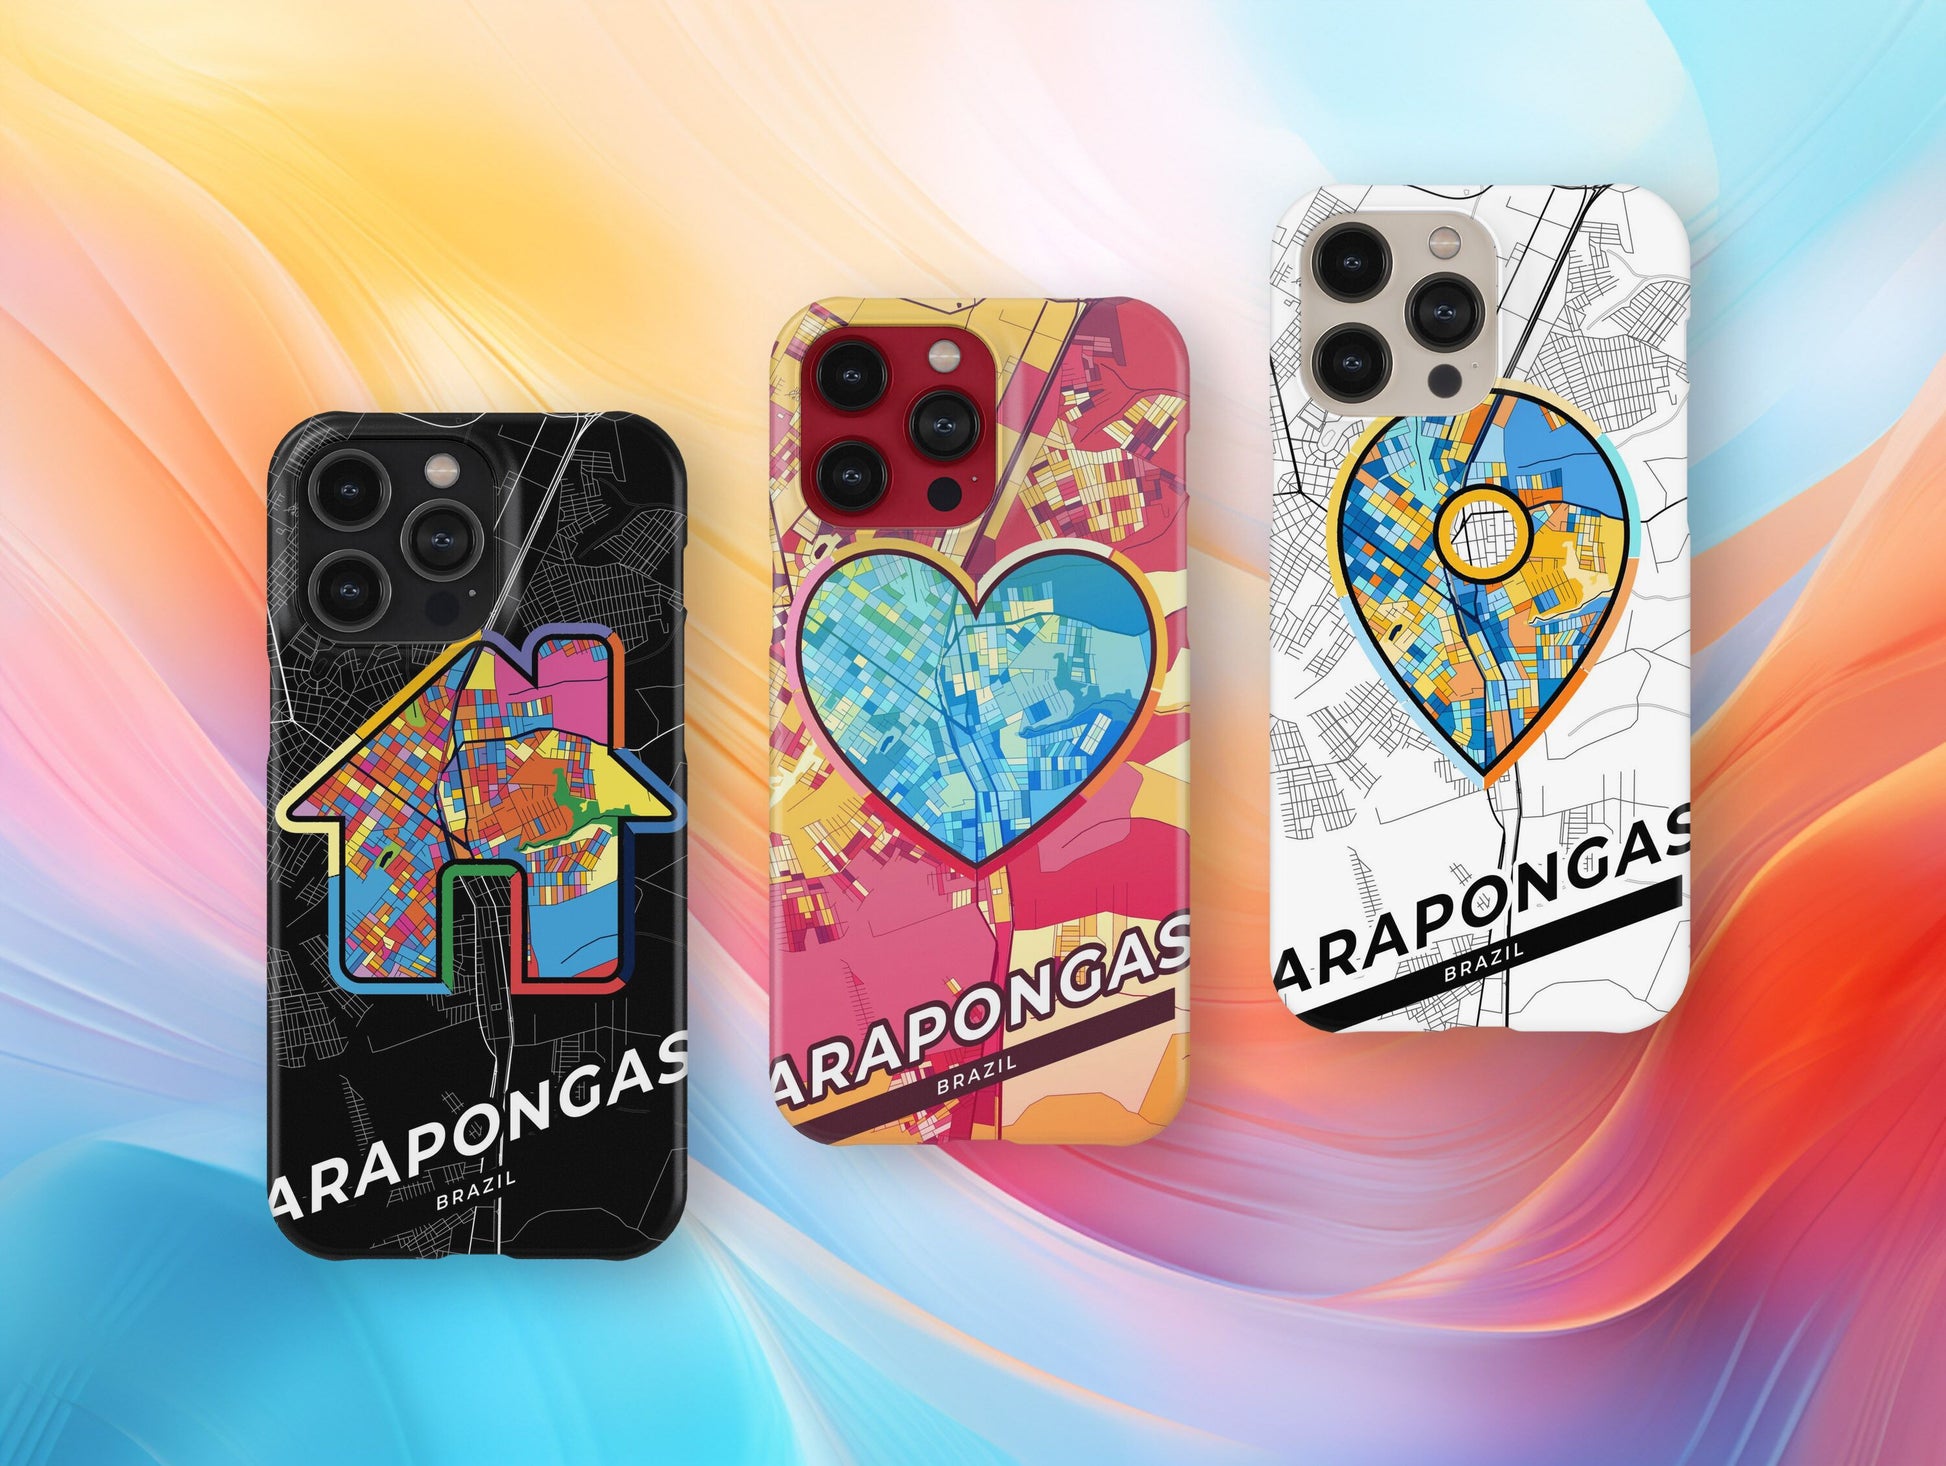 Arapongas Brazil slim phone case with colorful icon. Birthday, wedding or housewarming gift. Couple match cases.